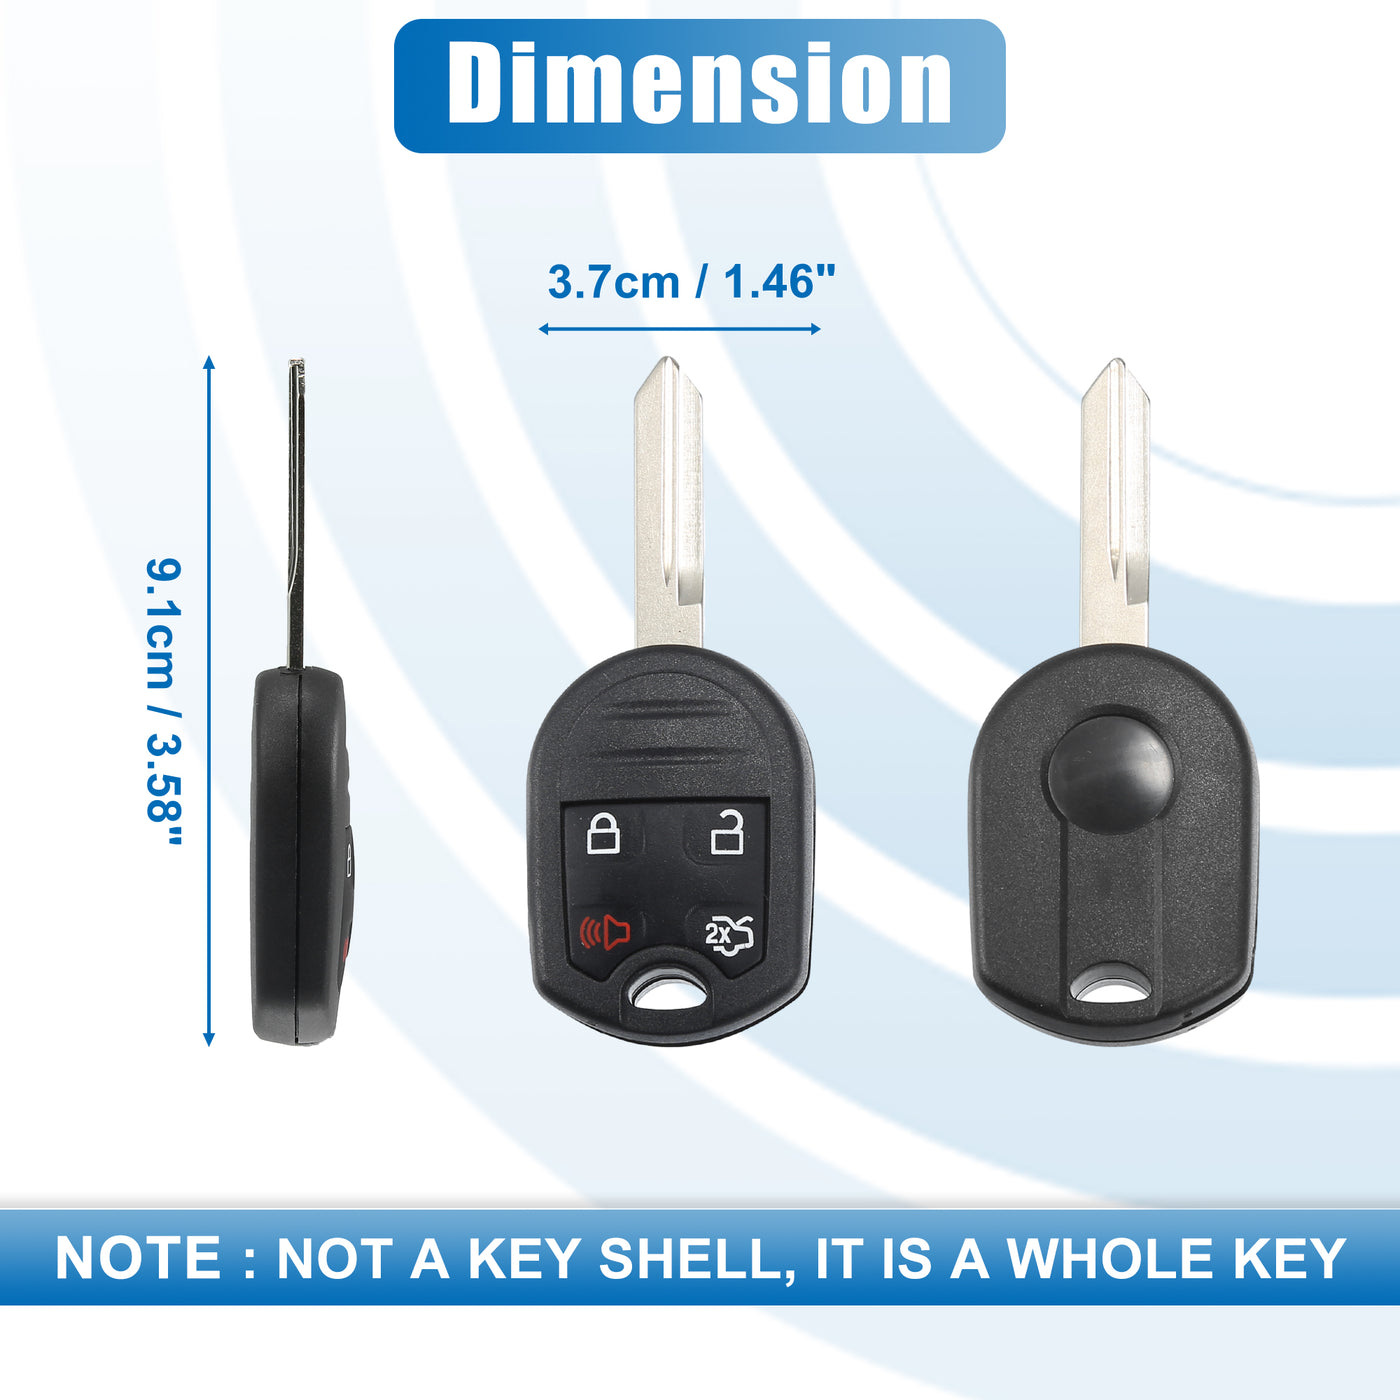 uxcell Uxcell Replacement Keyless Entry Remote Car Key Fob CWTWB1U793 315MHz for Ford Explorer 2001-2015 for Mustang Expedition Edge Focus Taurus Escape Flex Fusion for Lincoln Navigator